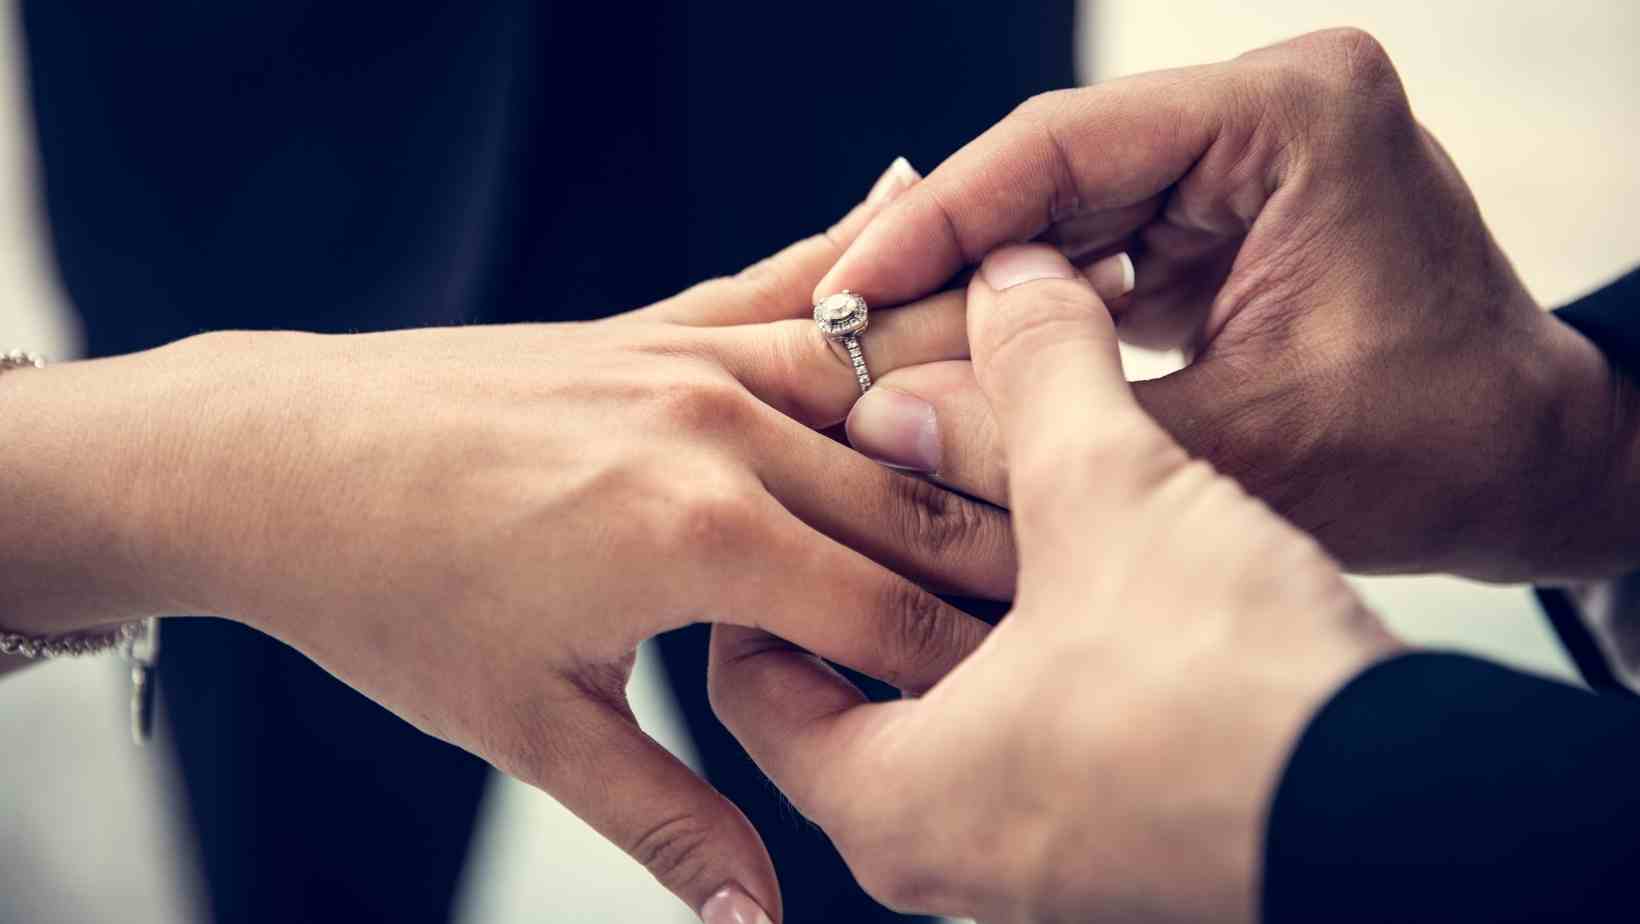 Canva pro stock image showing a close up of a man putting a ring on a woman's hand